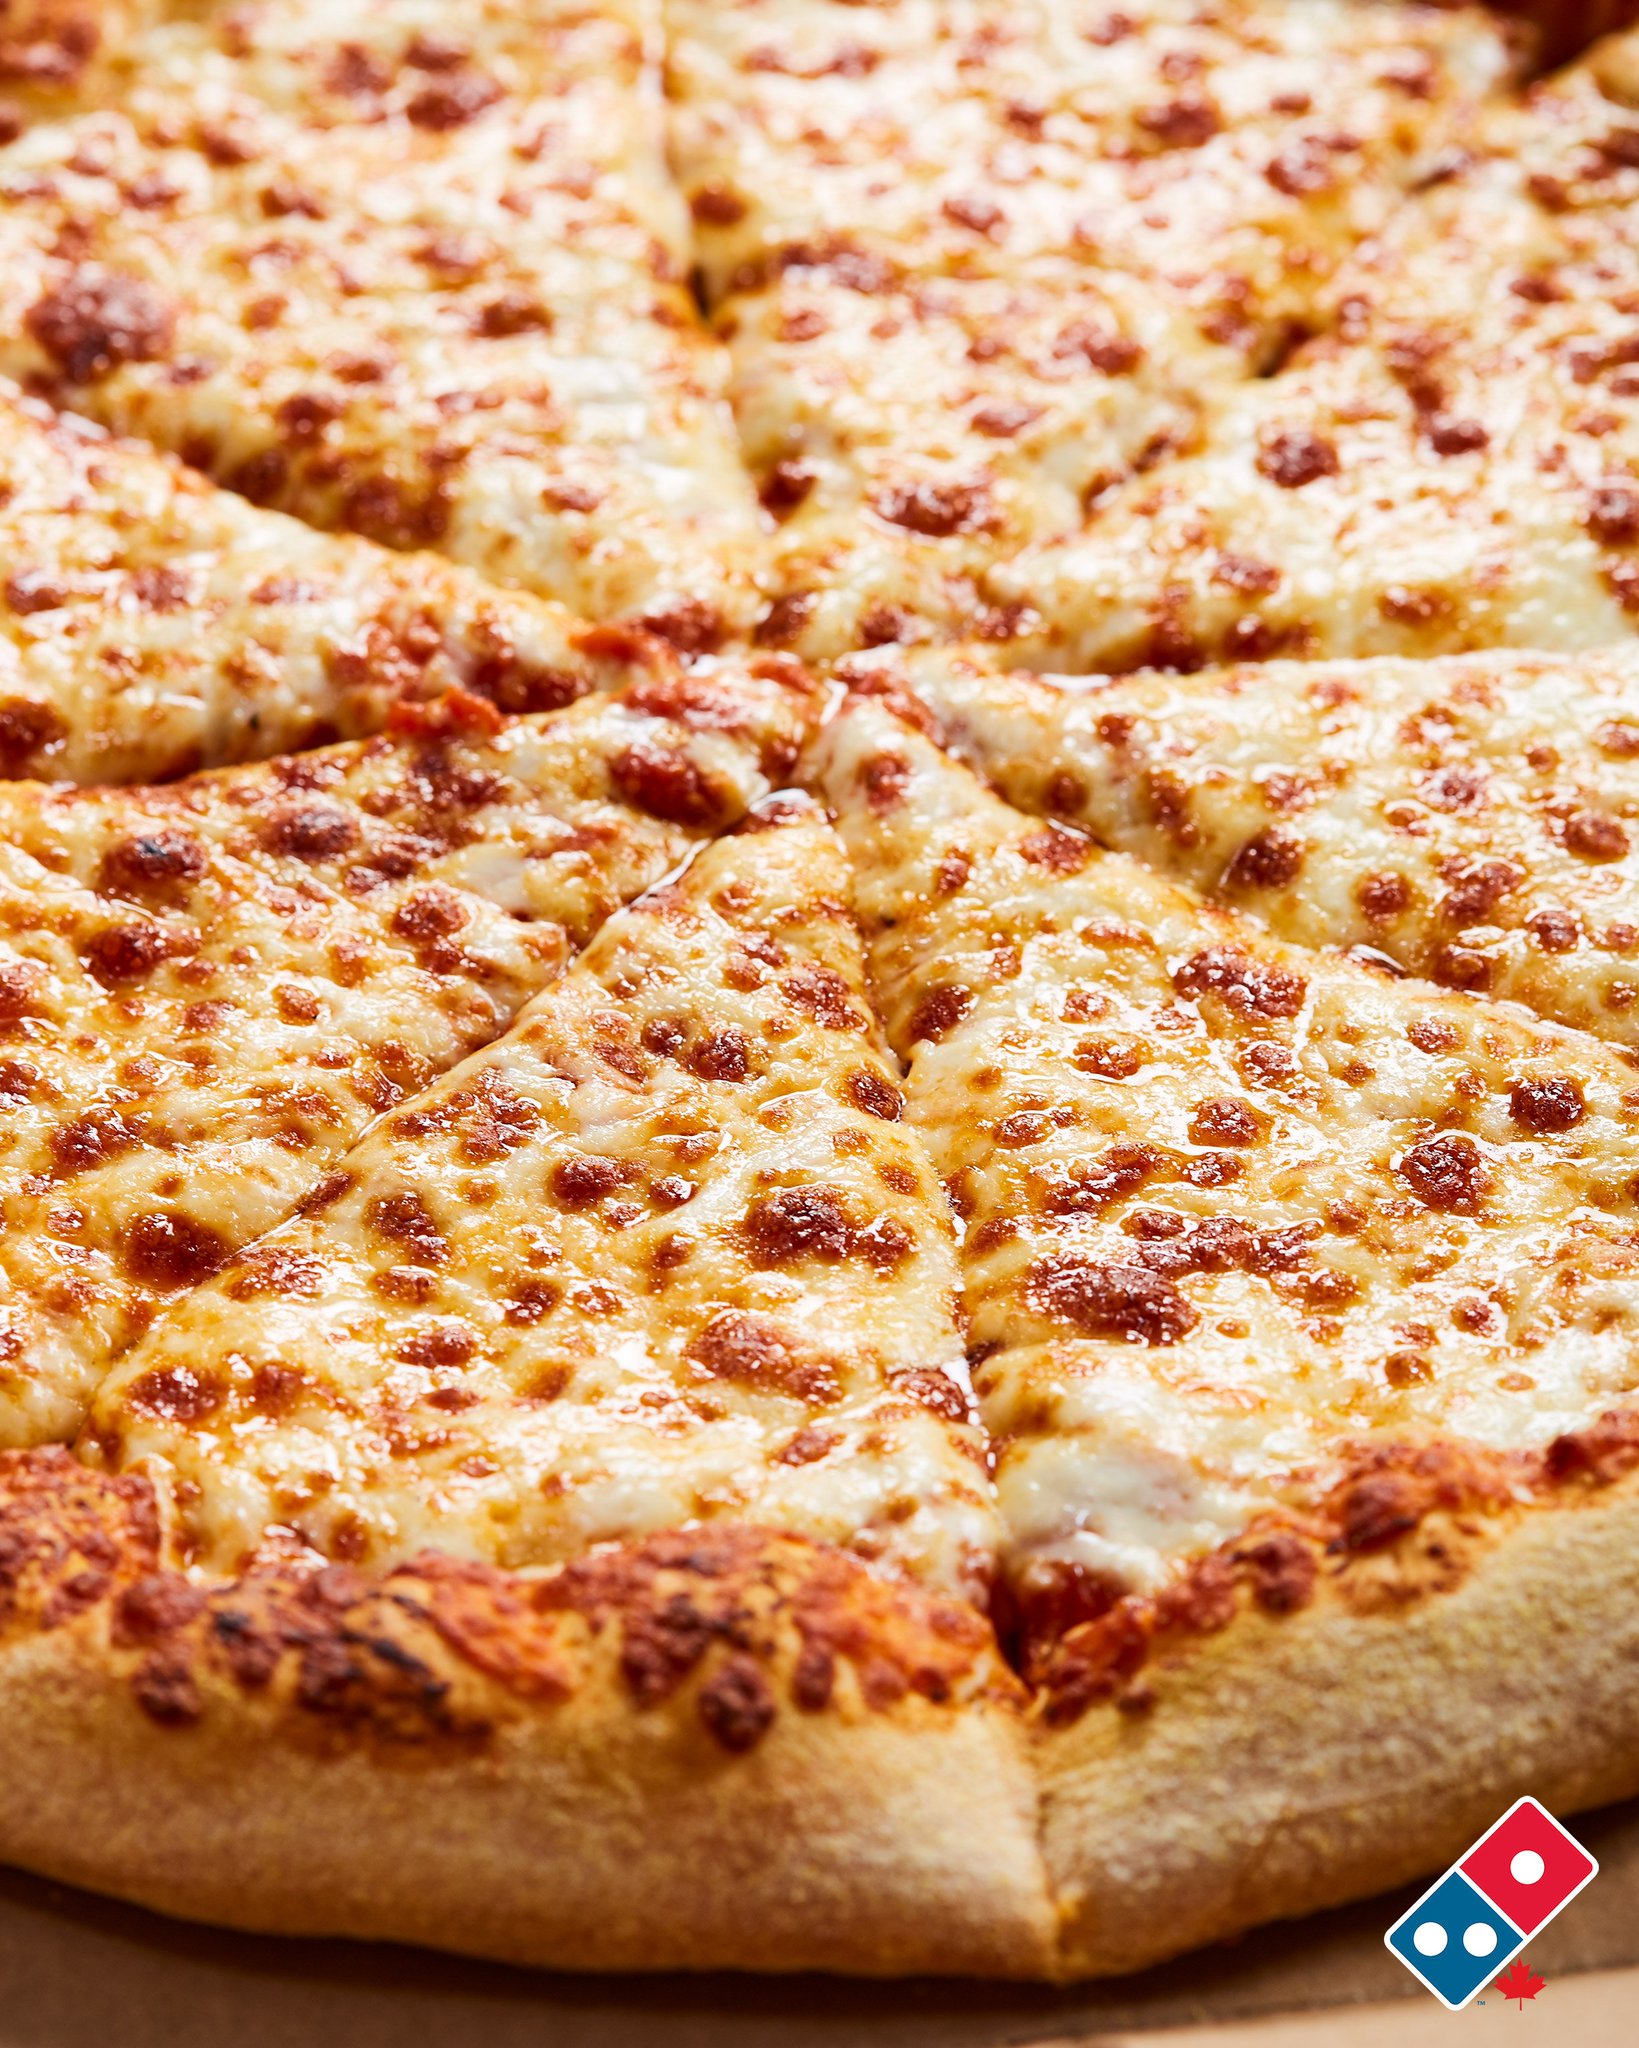 Domino's Canada on Twitter "Happy (Pizza) Pi Day! To celebrate, we're